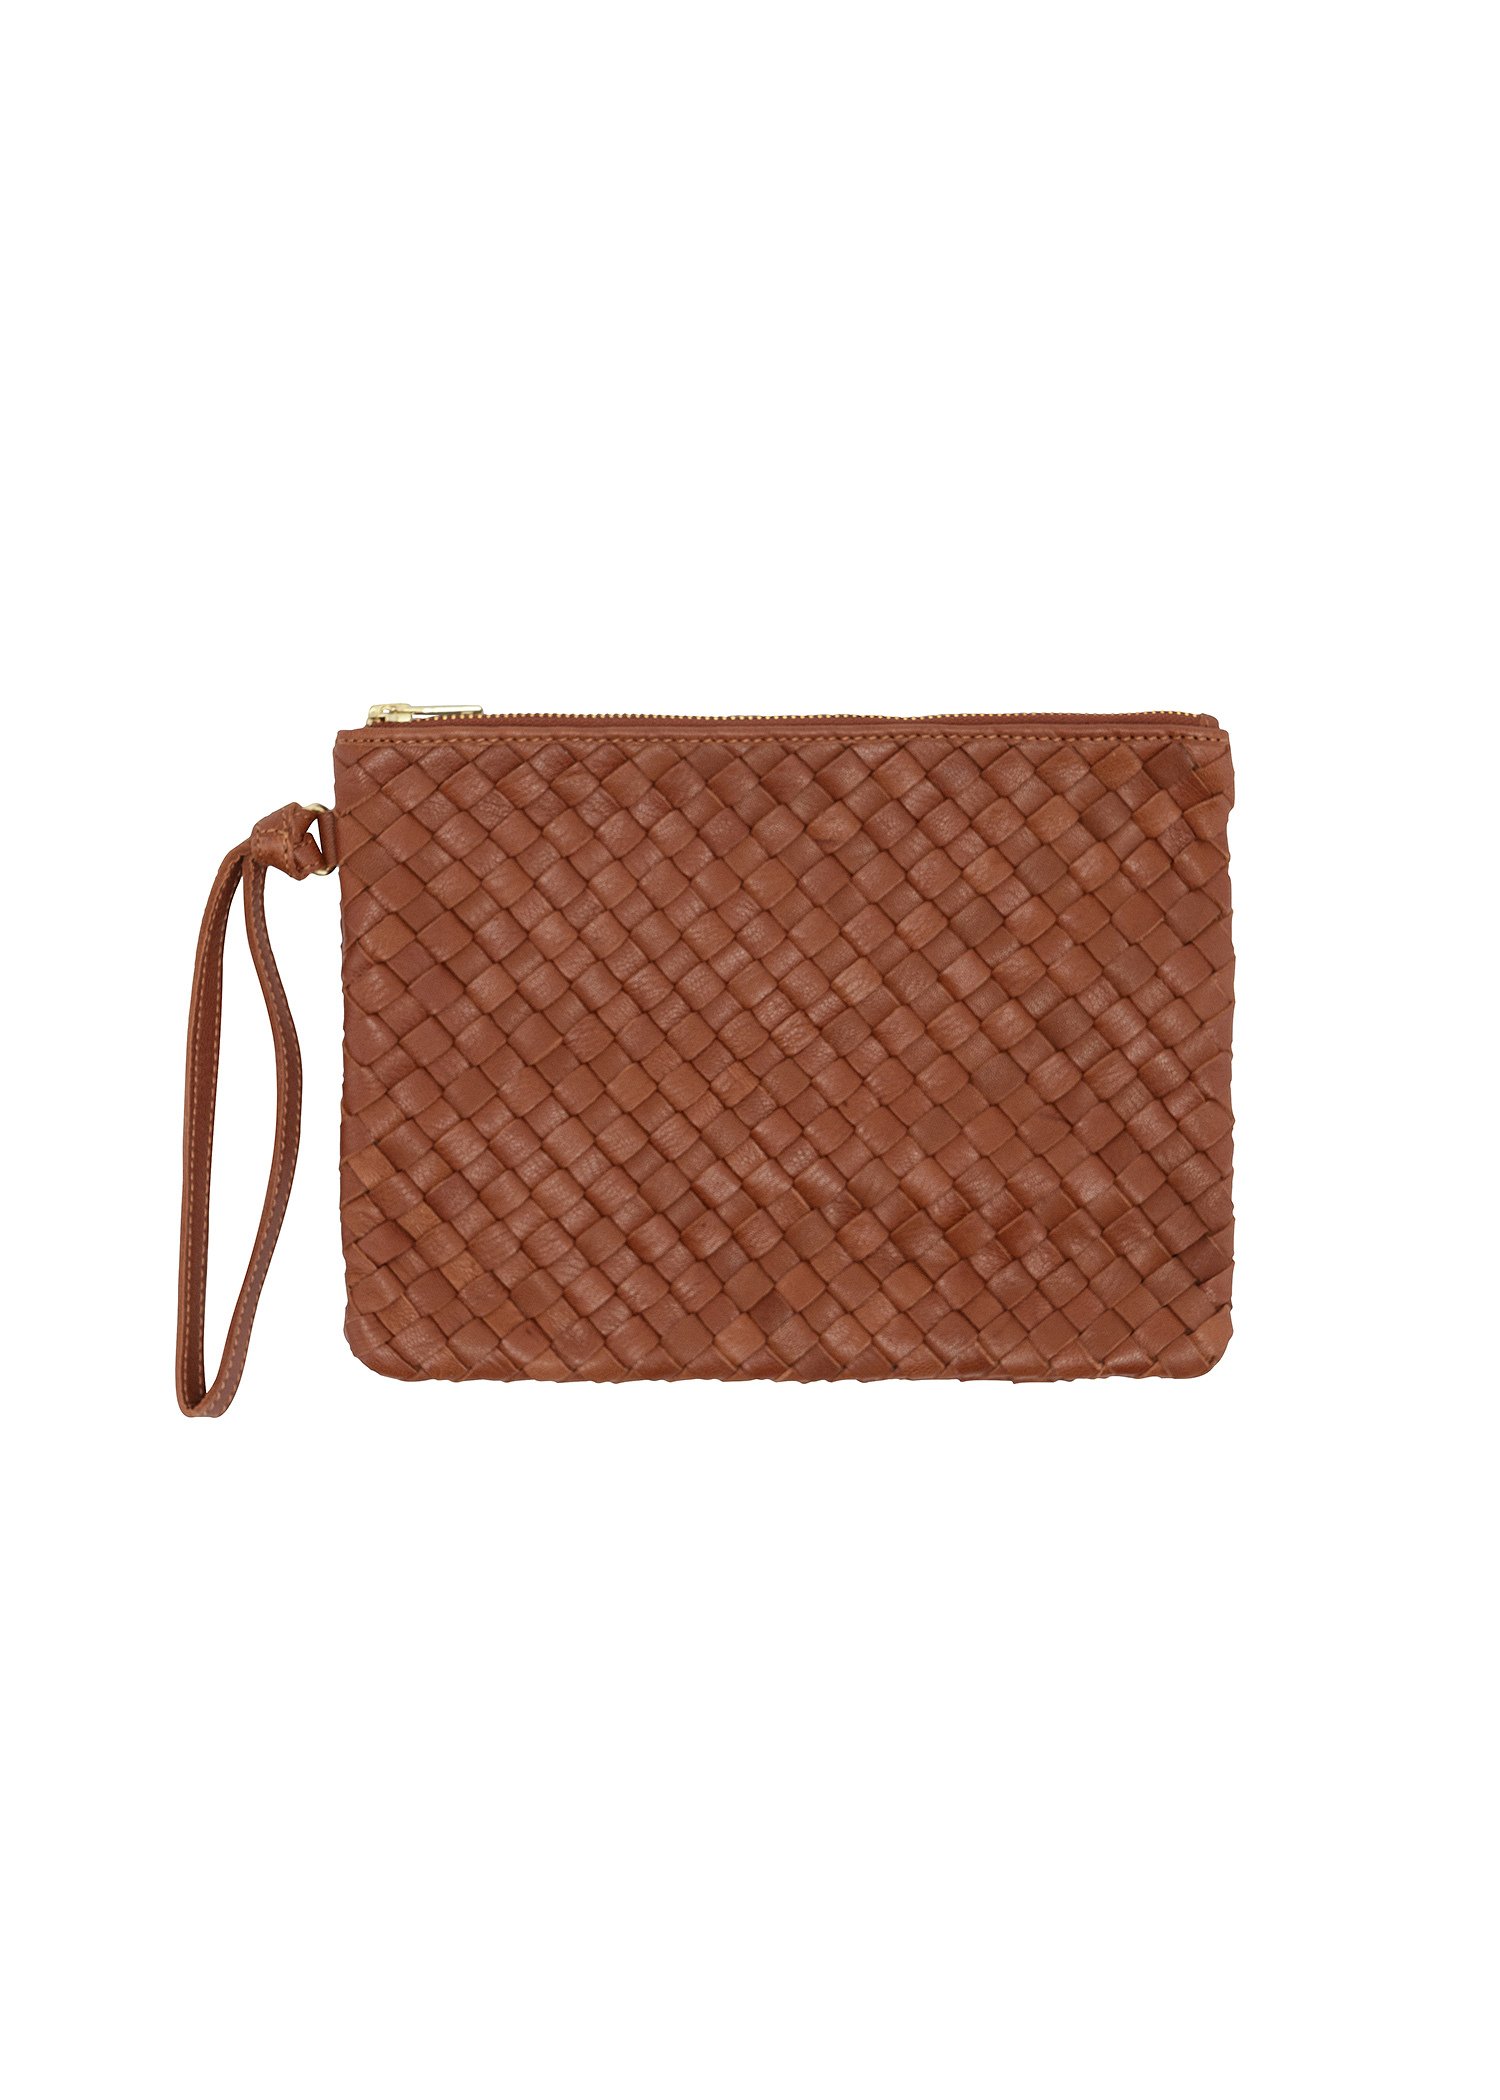 Weaved leather clutch